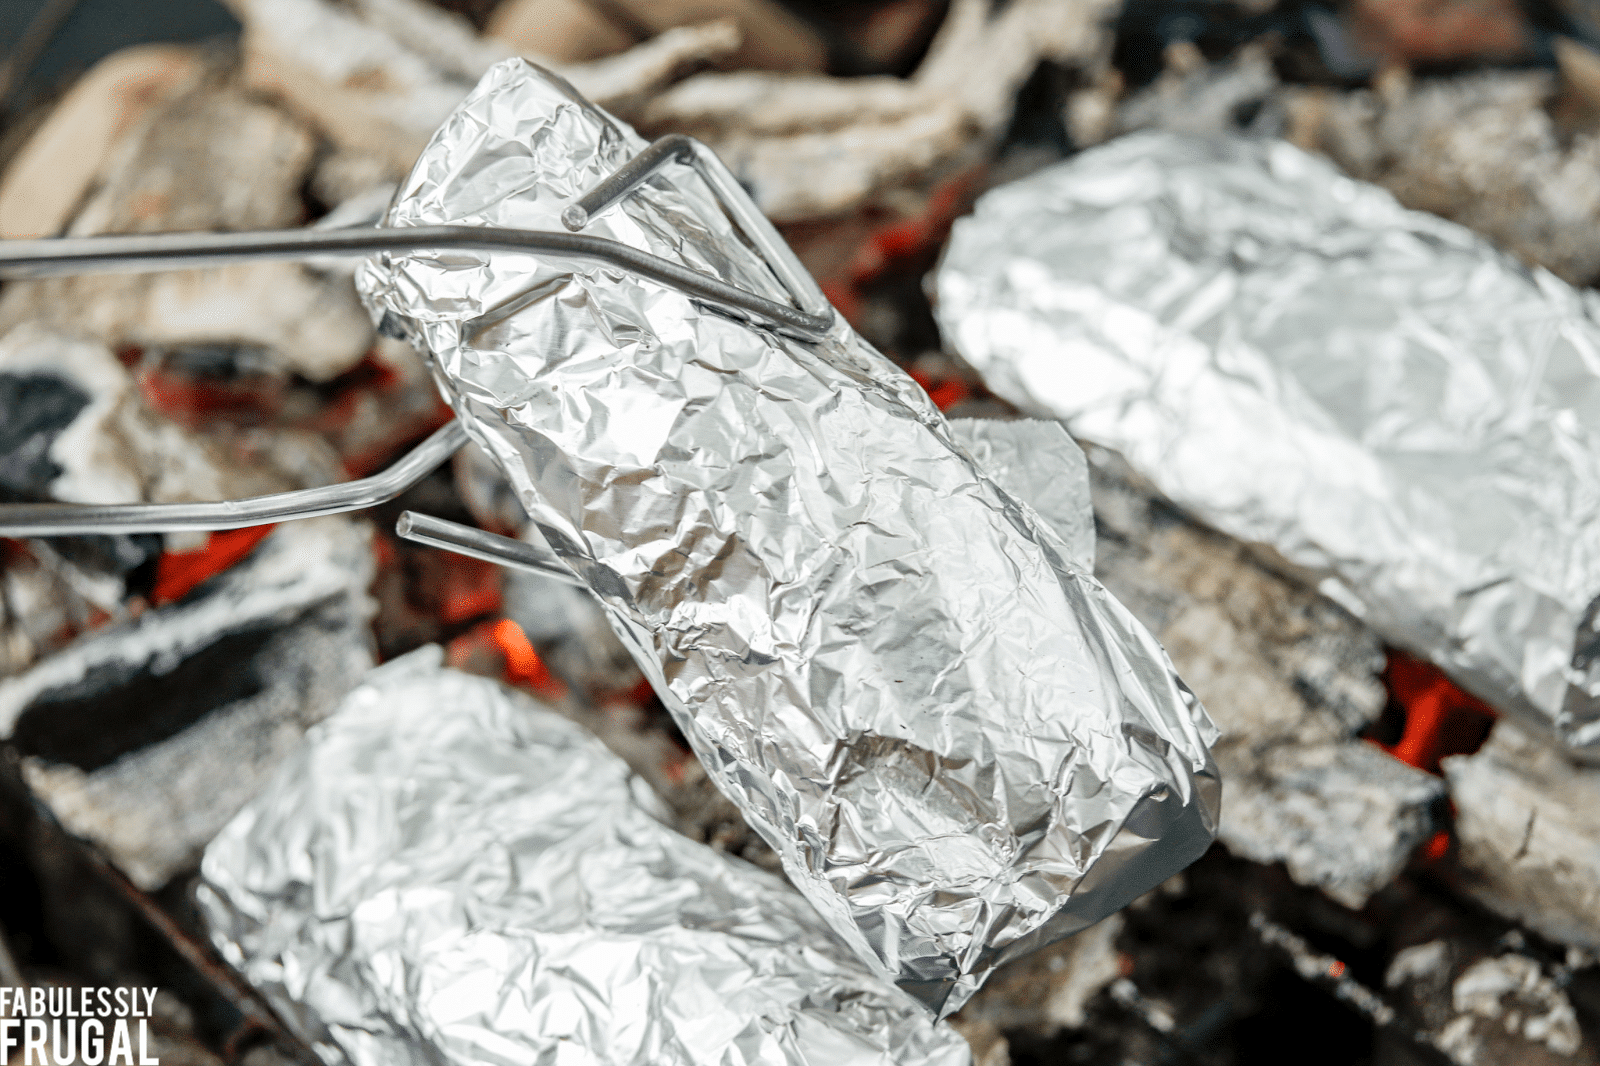 Cooking foil-wrapped burritos on the campfire